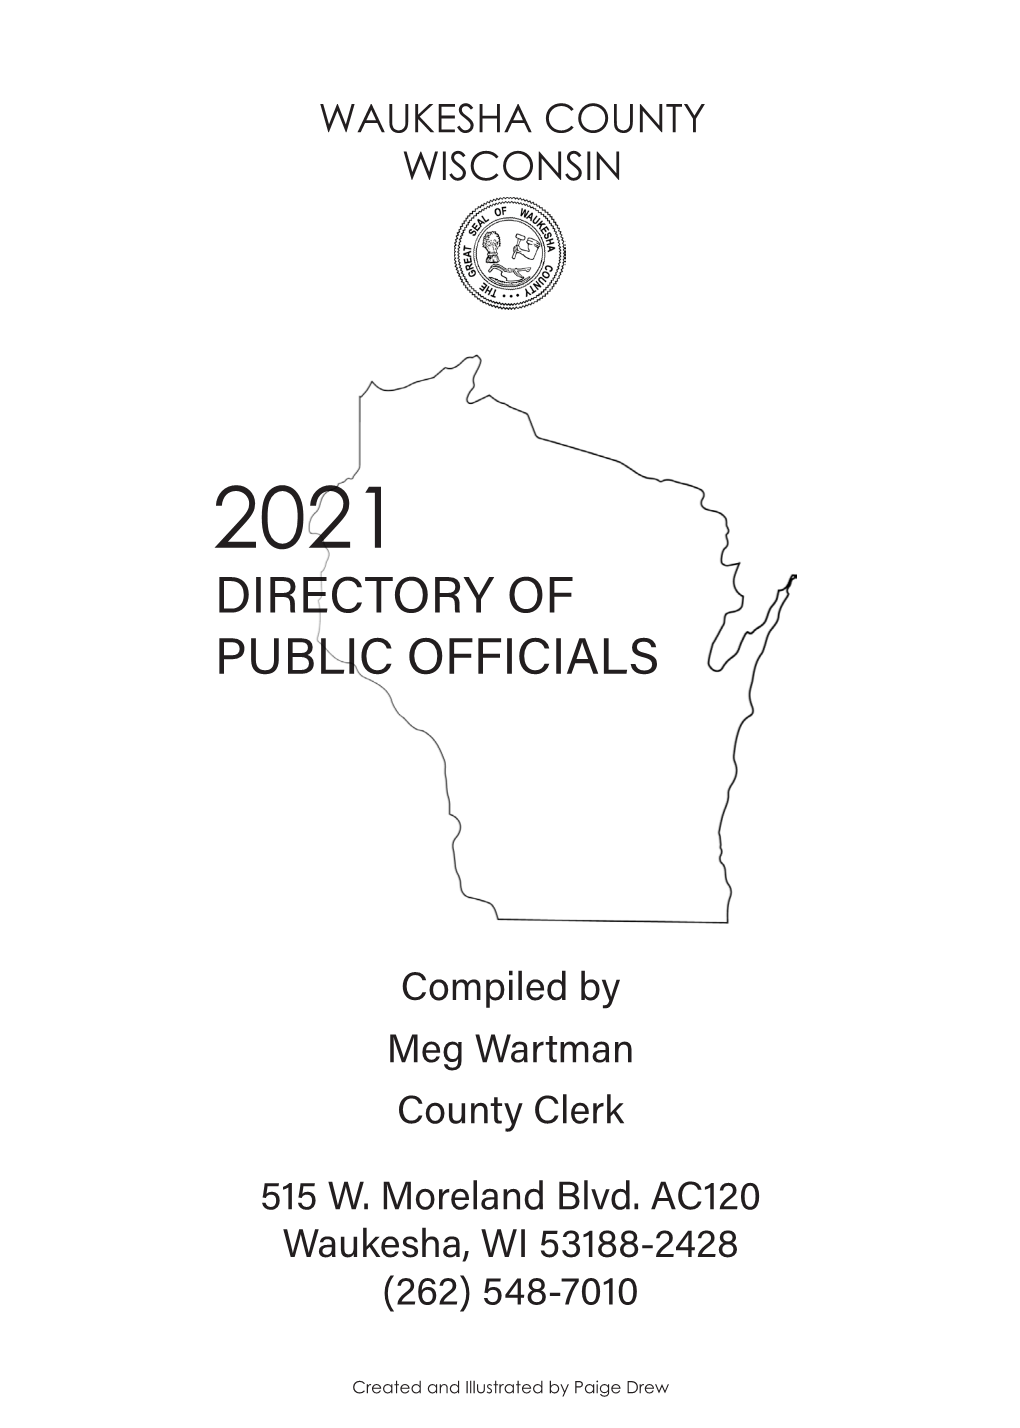 Waukesha County Directory of Public Officials